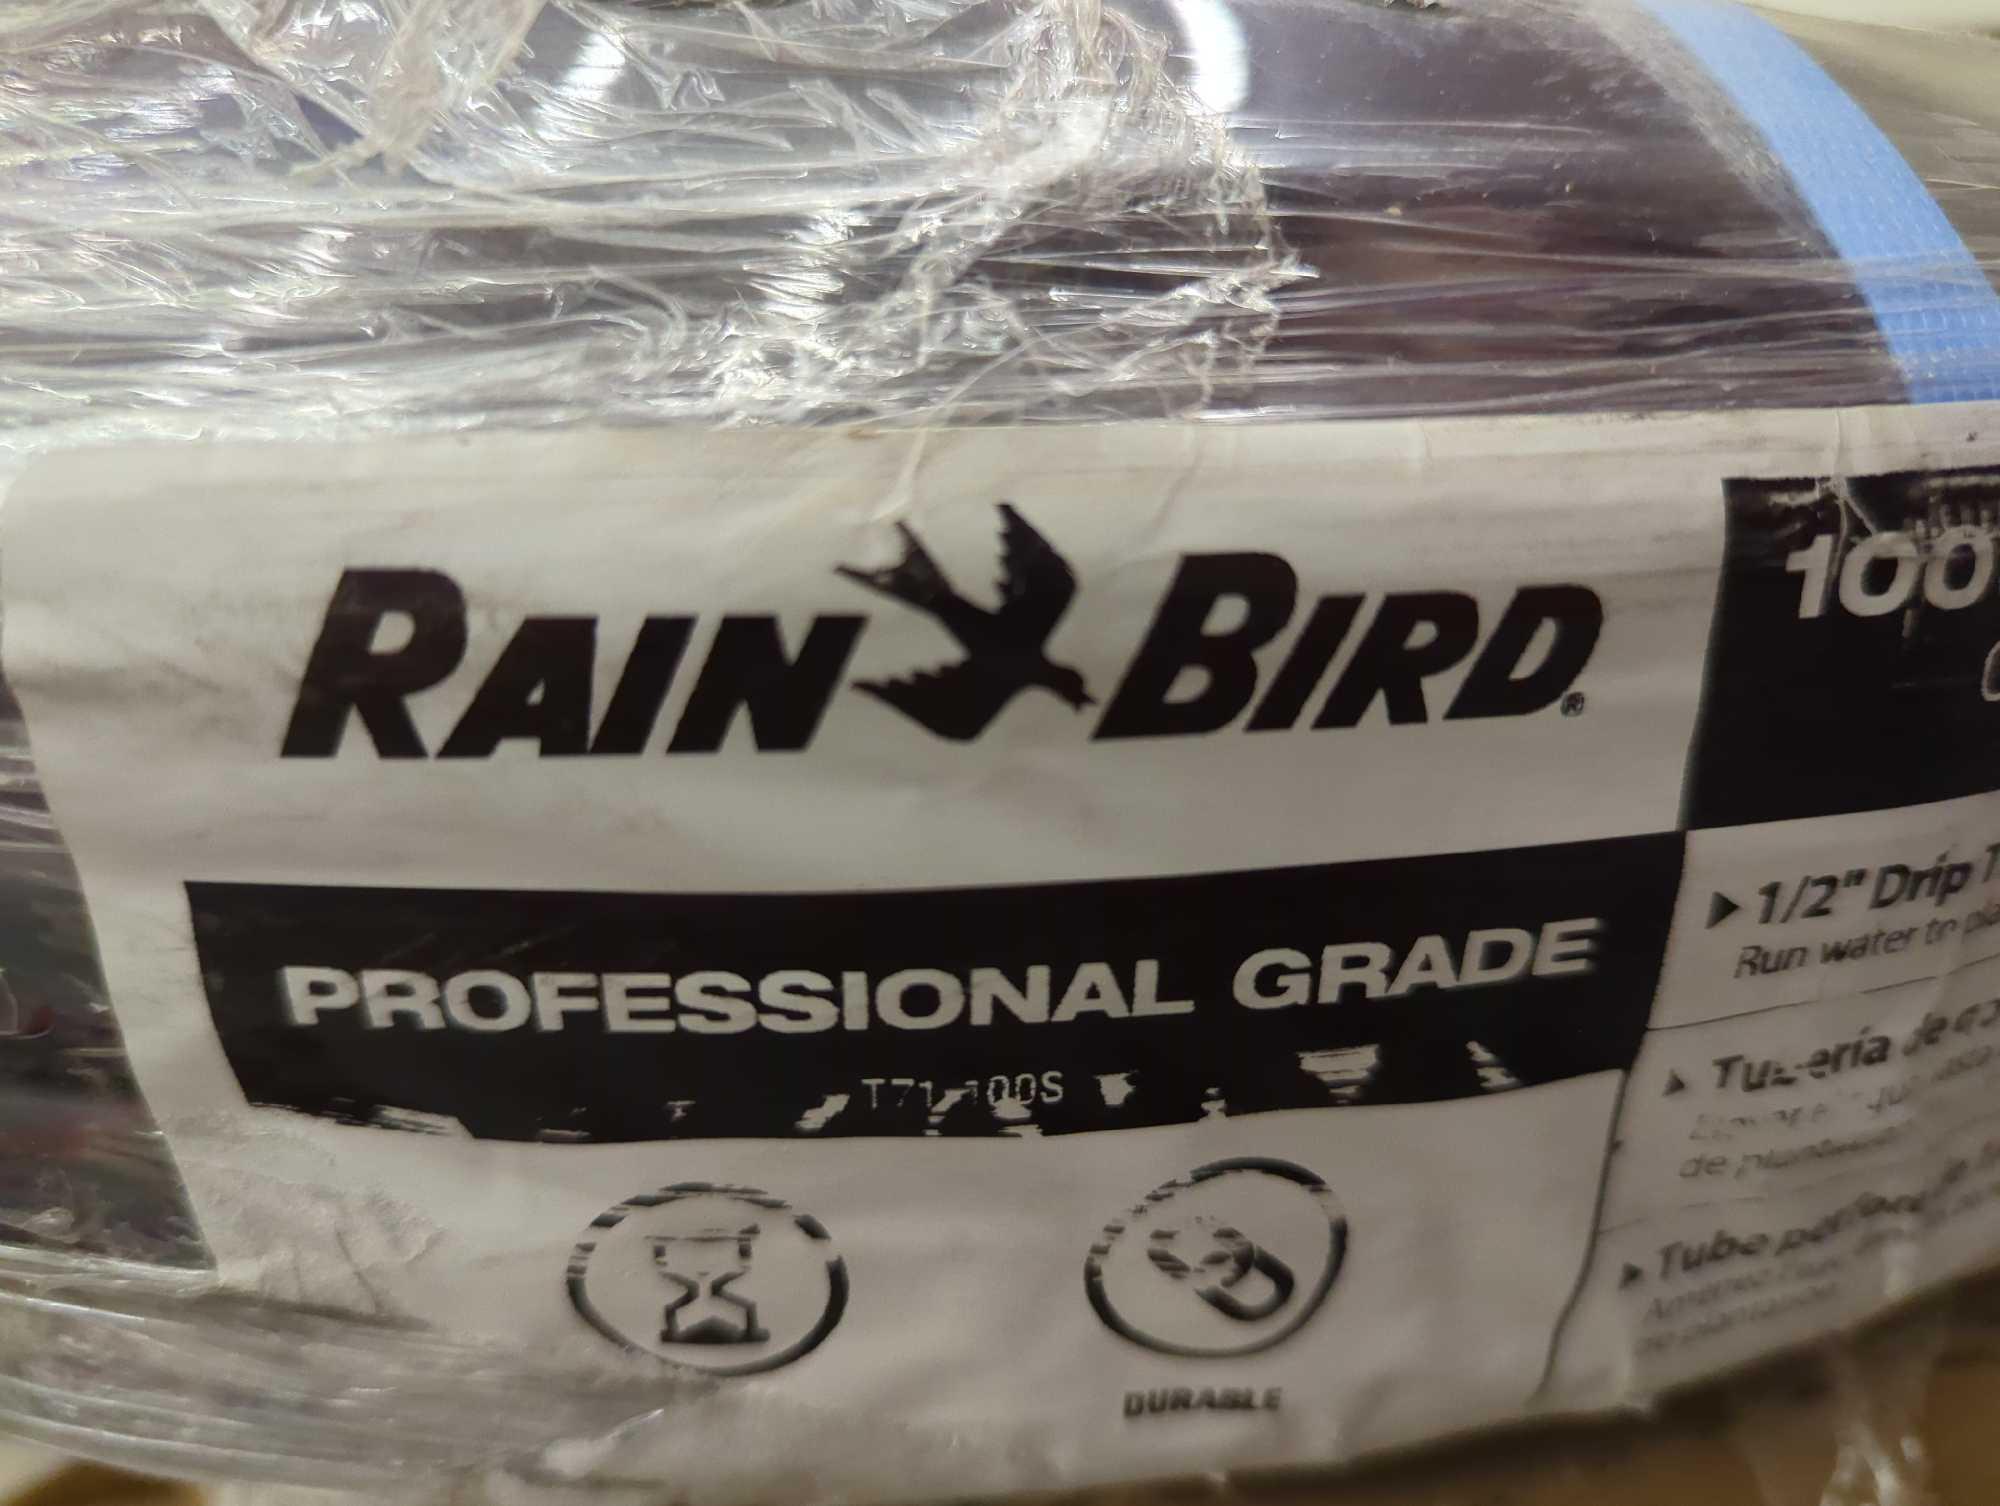 Rain Bird 1/2 in. (0.70 in. O.D.) x 100 ft. Distribution Tubing for Drip Irrigation, Appears to be